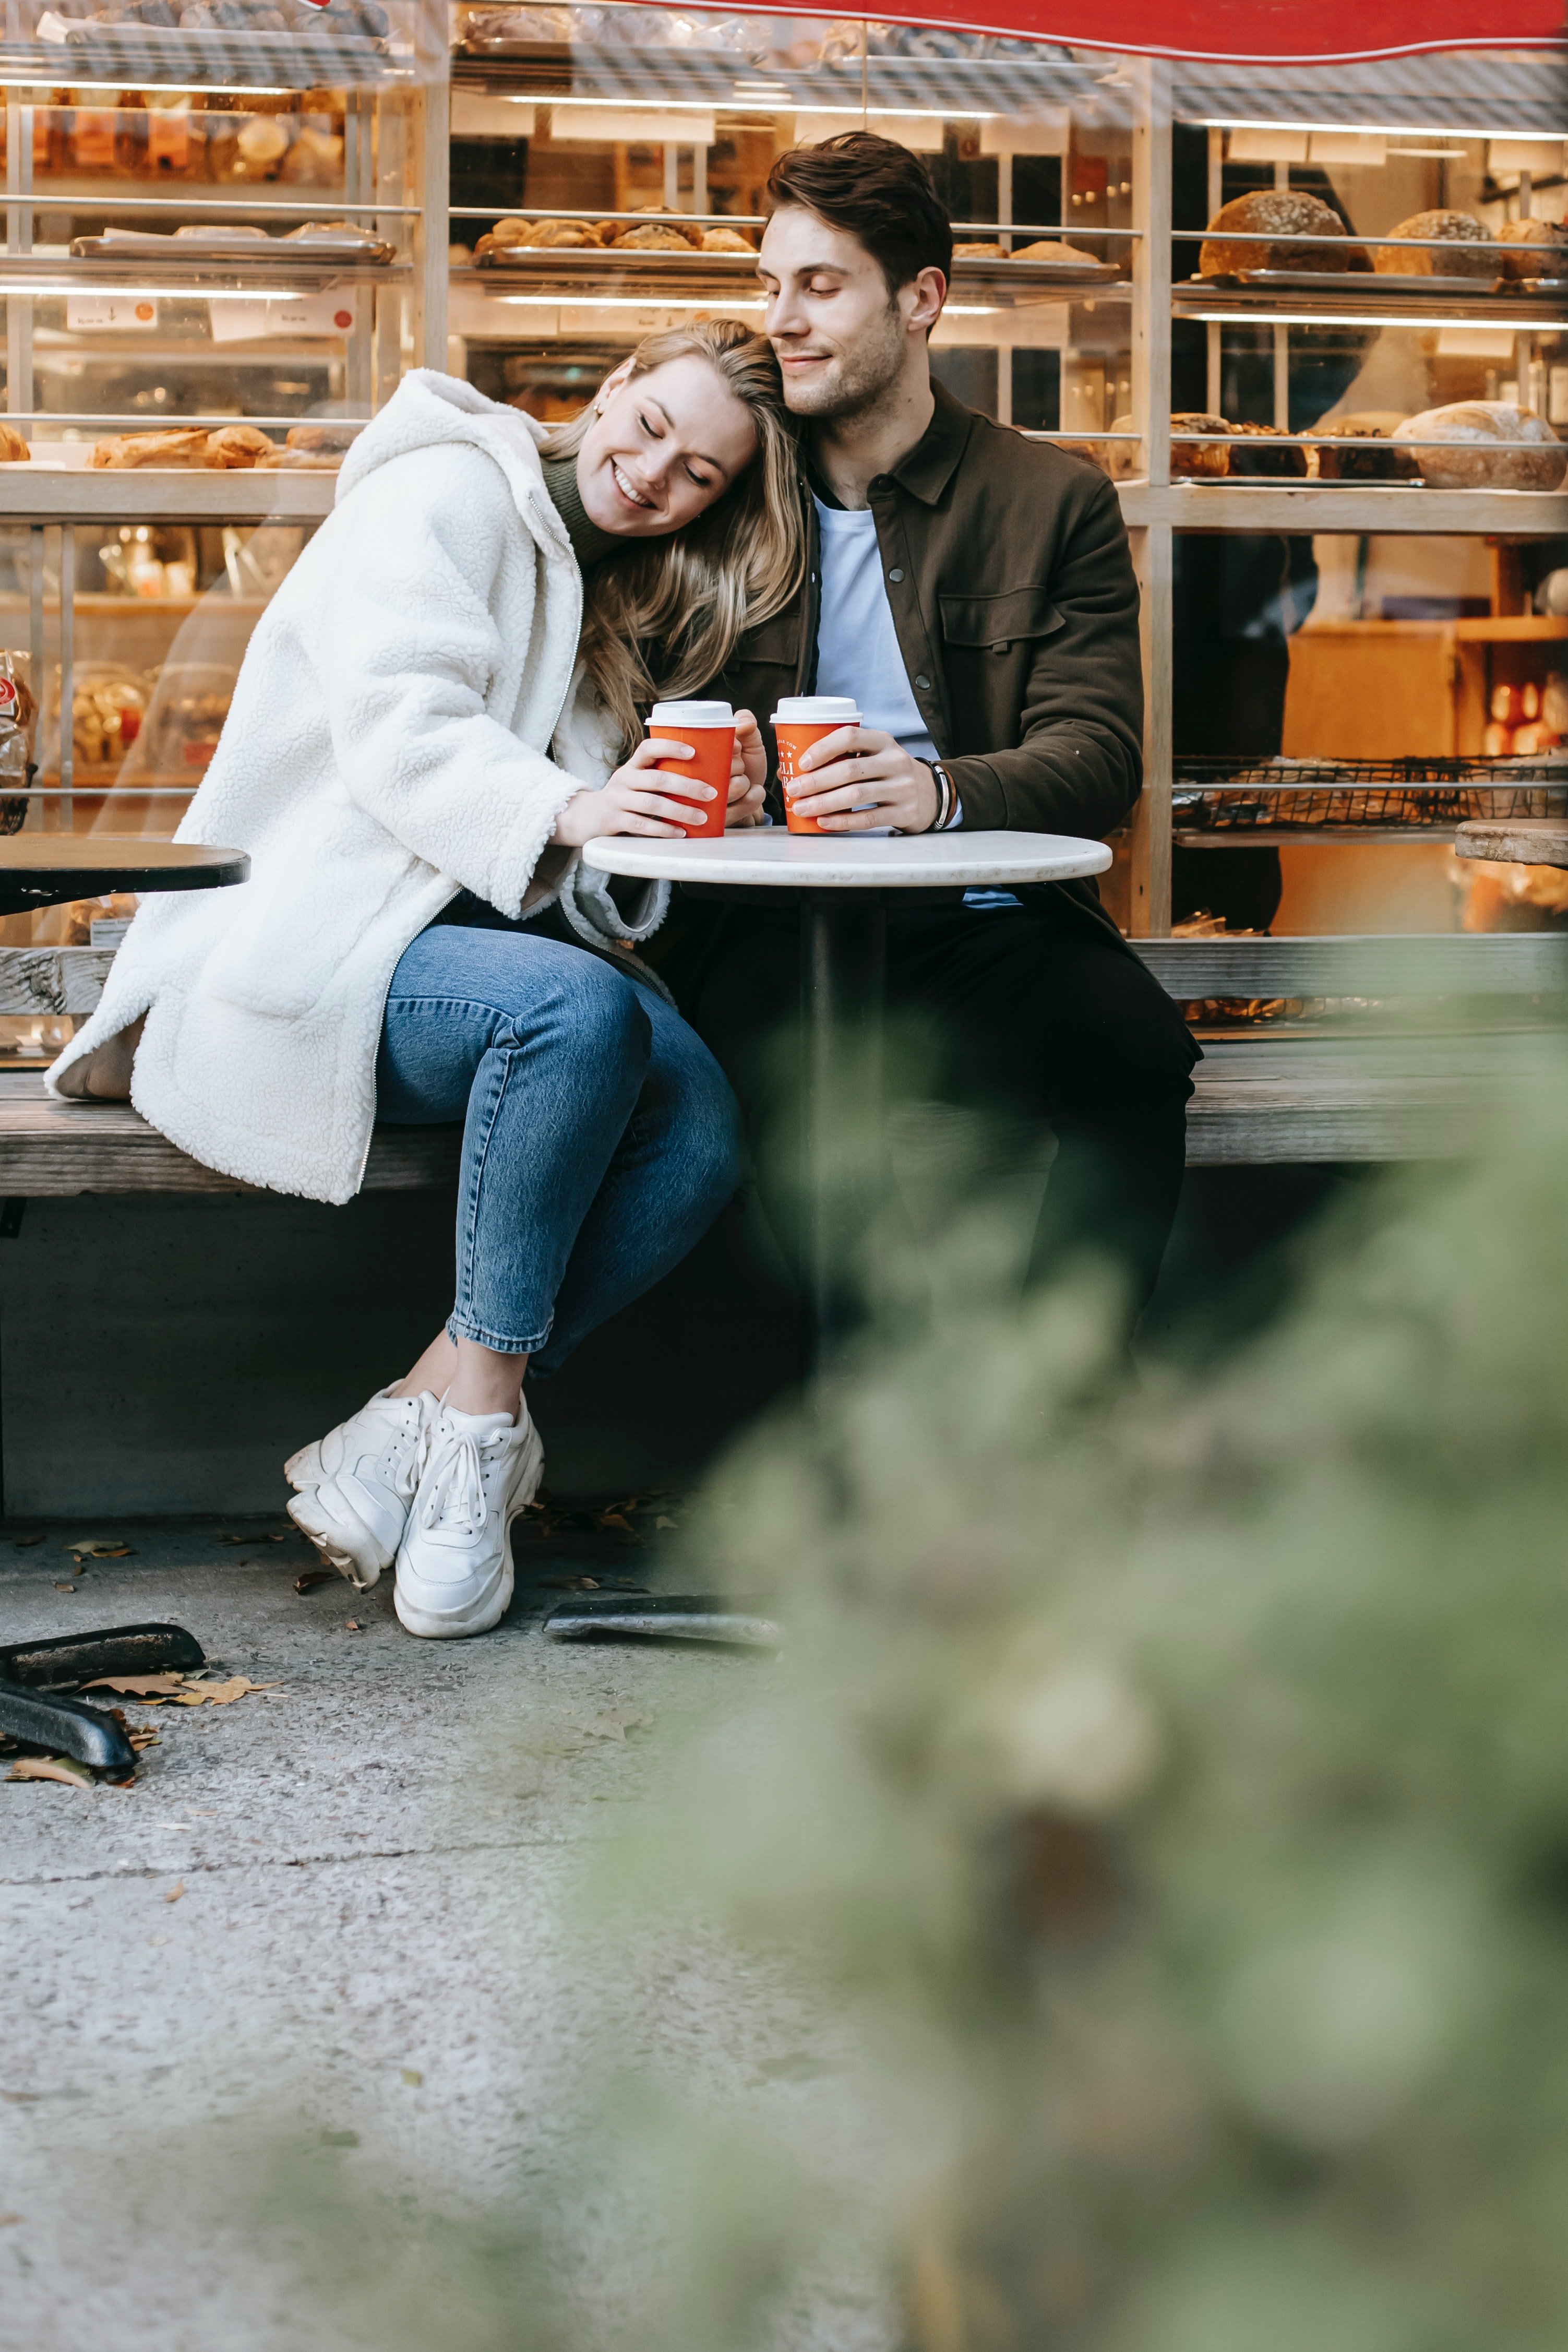 Pictured: A couple sitting at a street cafe with cups of drinks with the woman resting her head on her significant other | Source: Pexels 